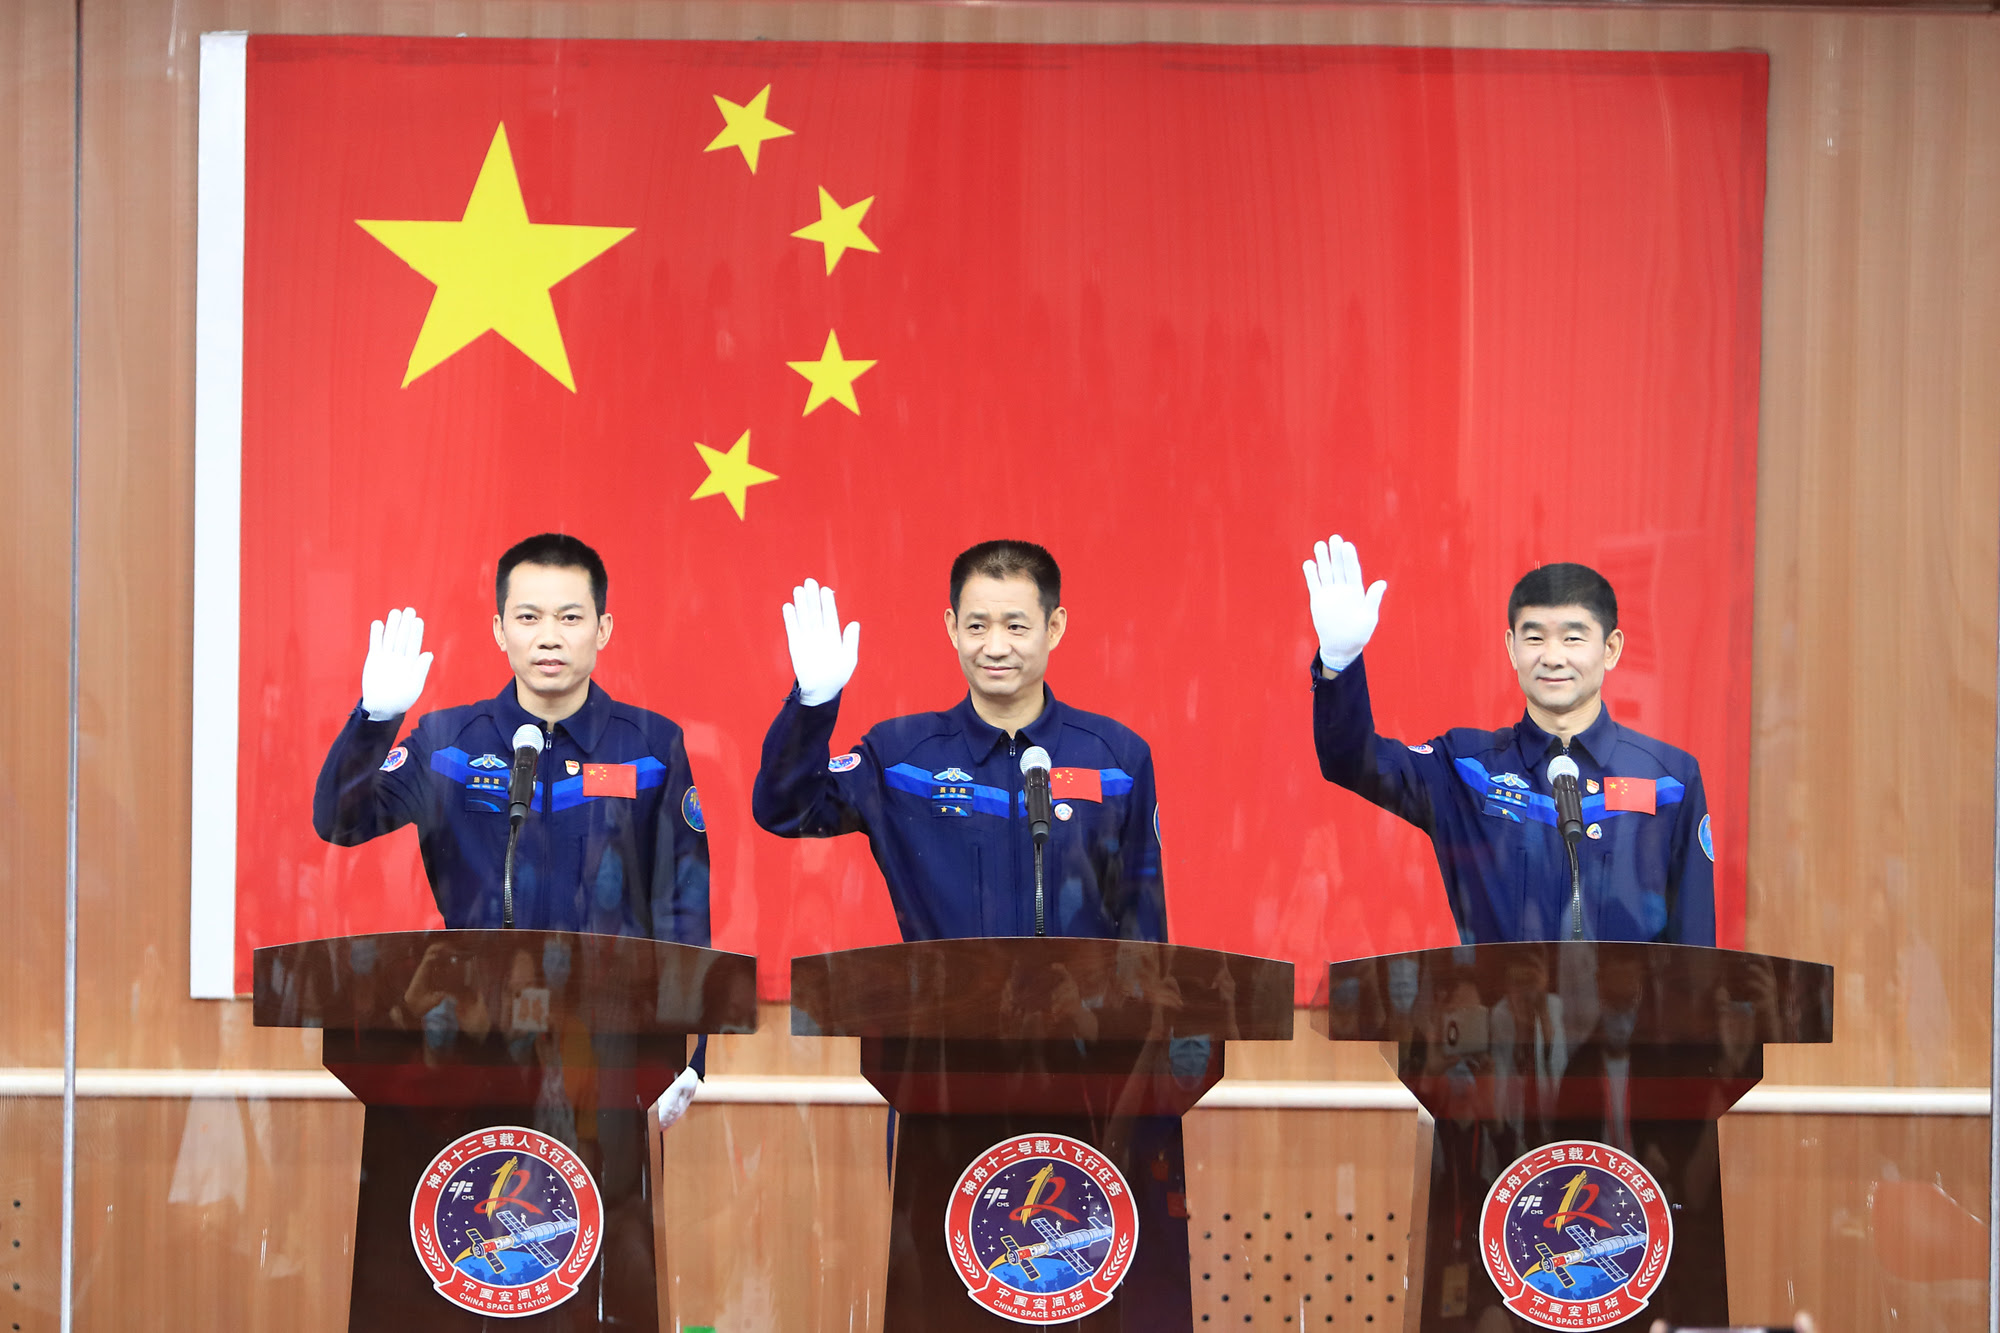 Tiangong: astronauts are working on China's new space station  here's what to expect #rwanda #RwOT